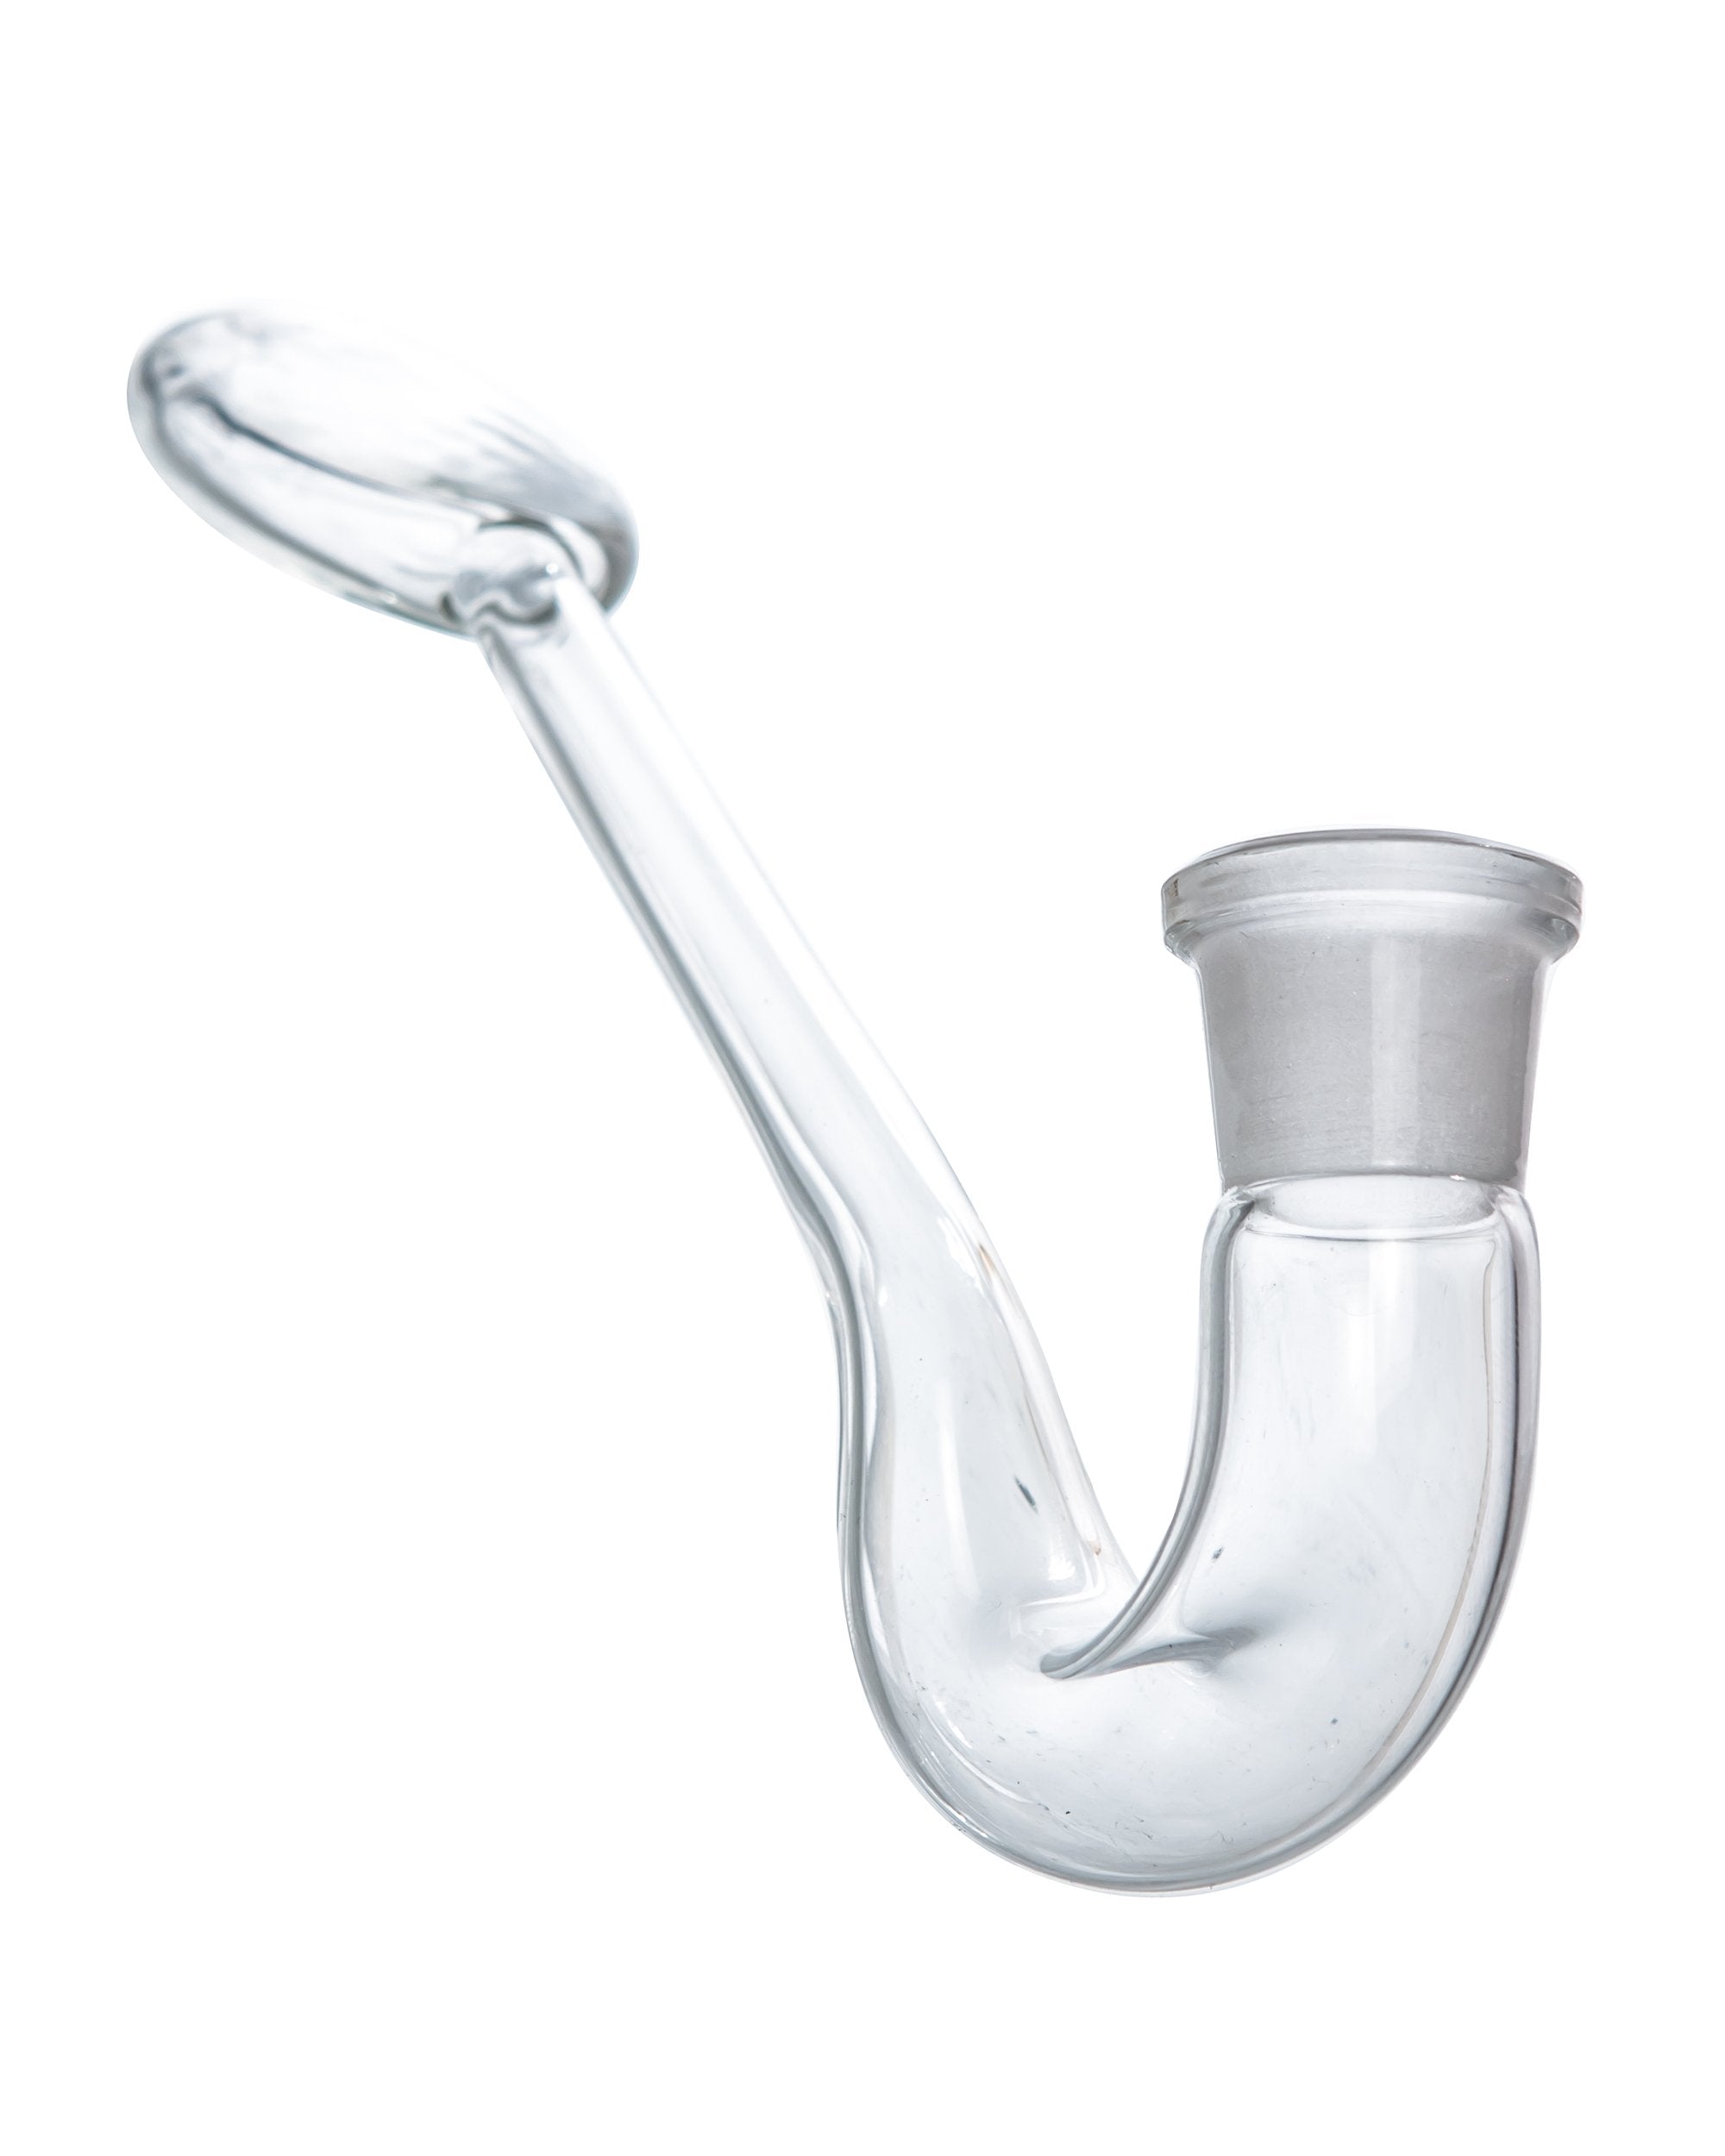 Is it Legal to Buy a Bong from an Online Headshop?